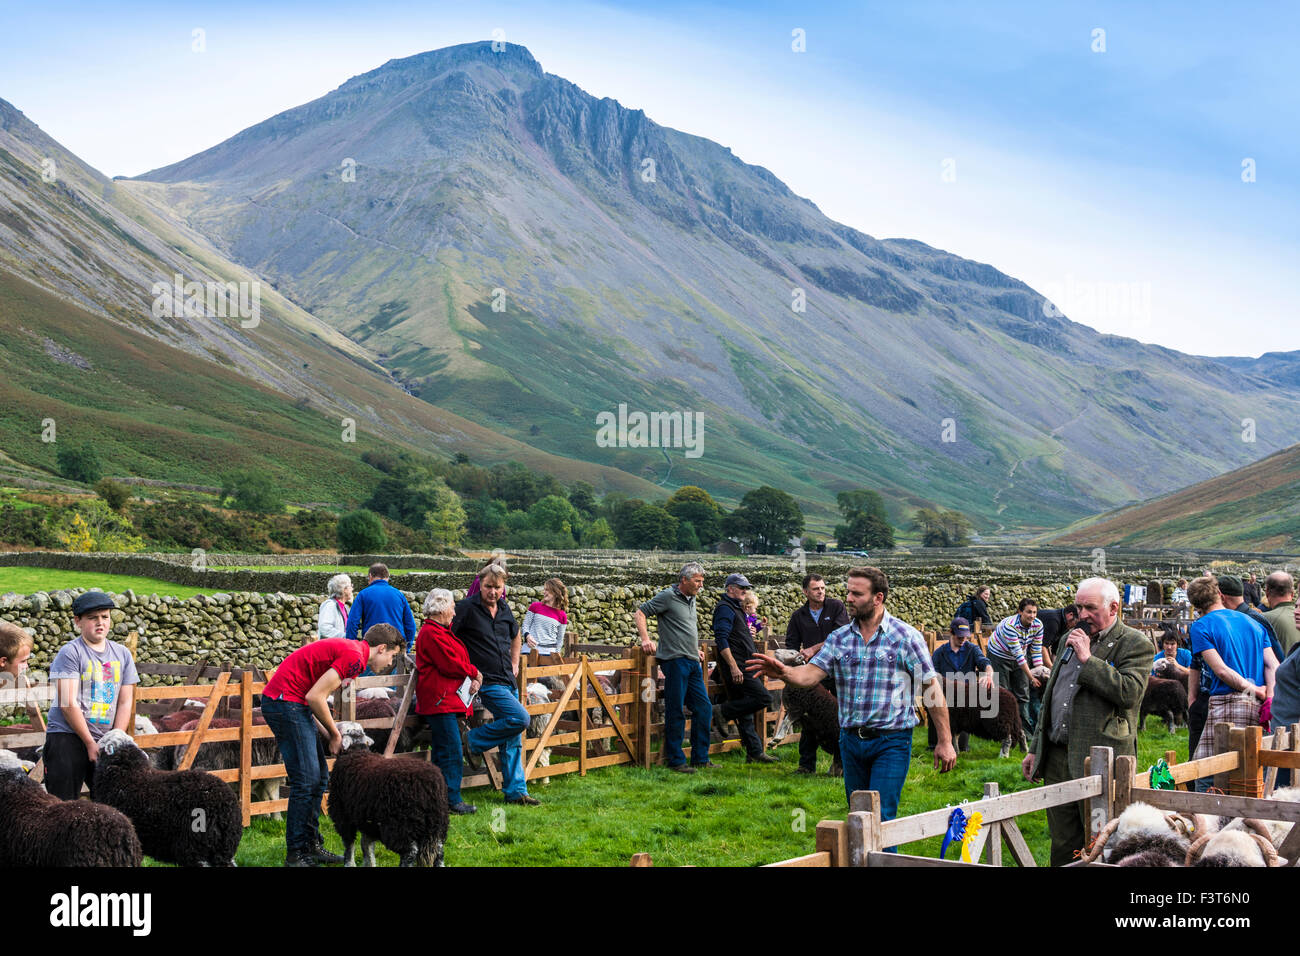 A judge inspects sheep in the young shepherds category, Wasdale Shepherds Meet, Cumbria, with Great Gable in the background. Stock Photo